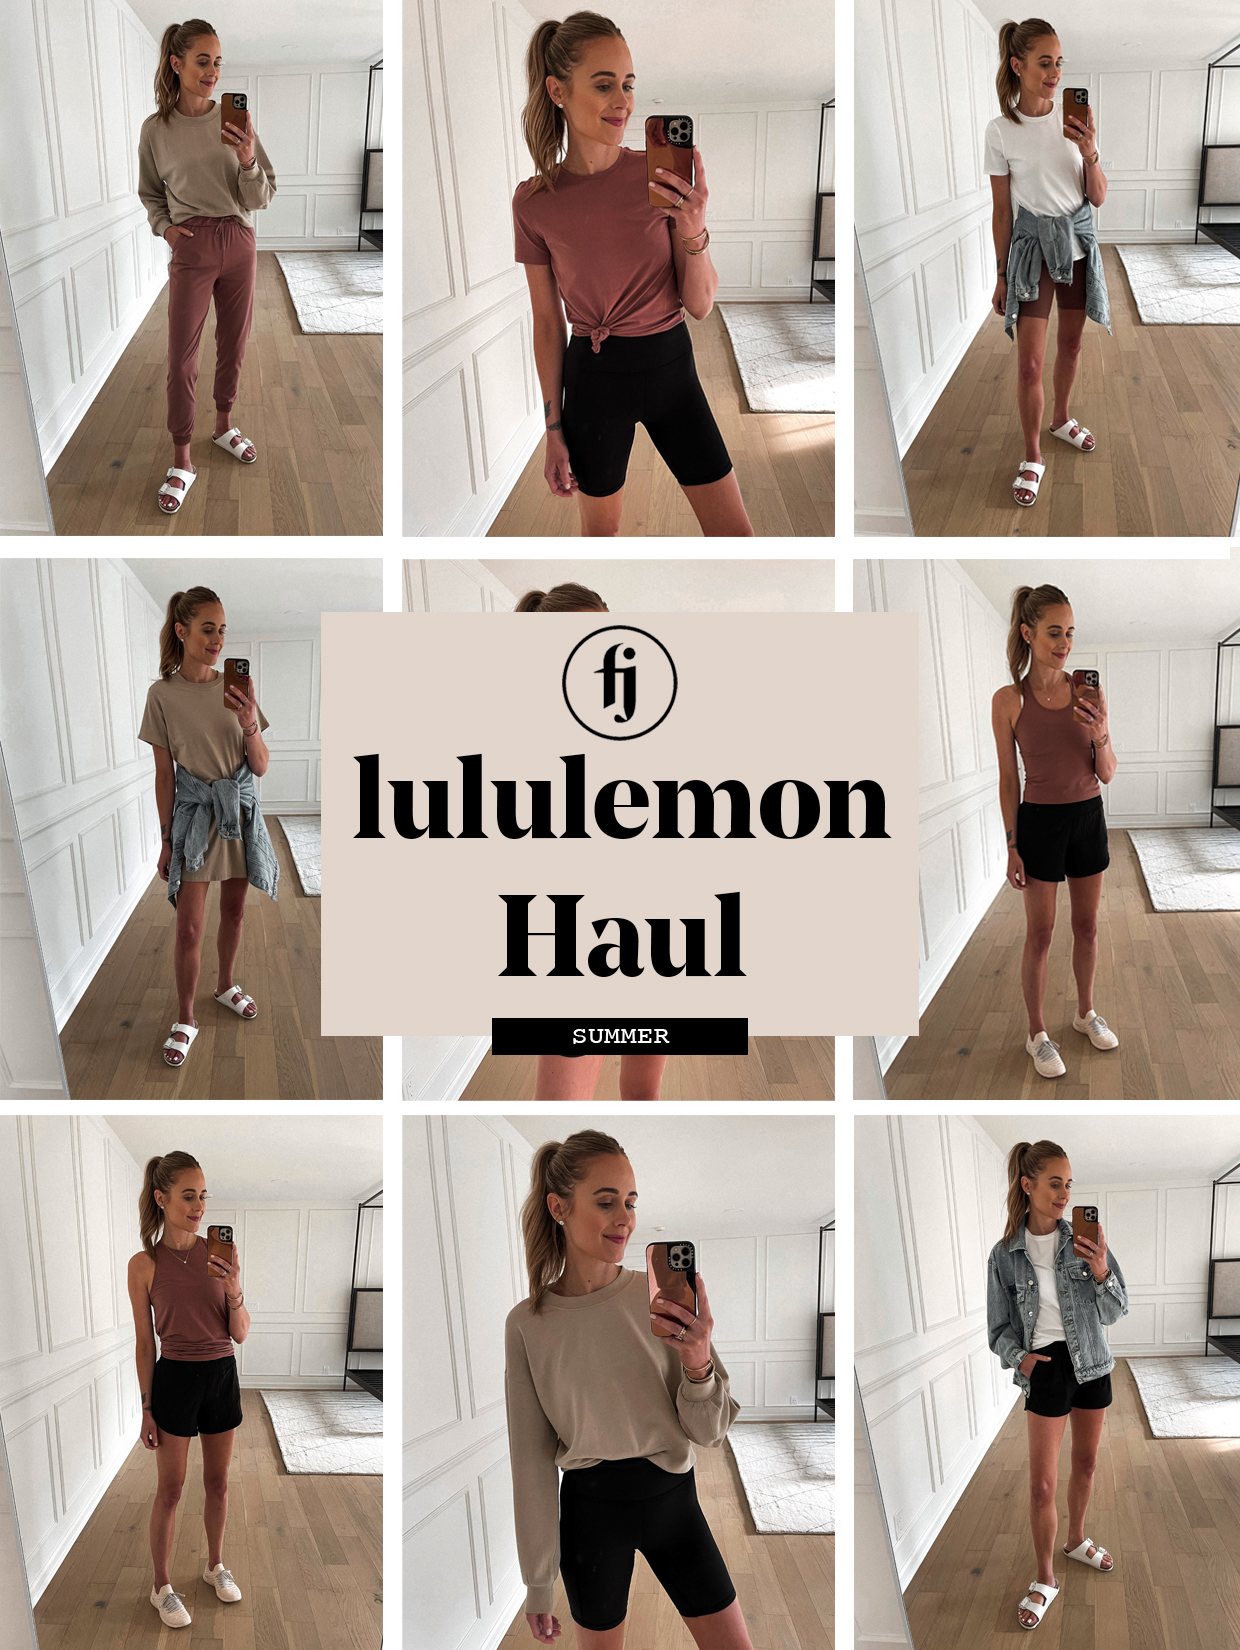 10 New Items From lululemon to Take You From Work(out) to Play - Fashion  Jackson